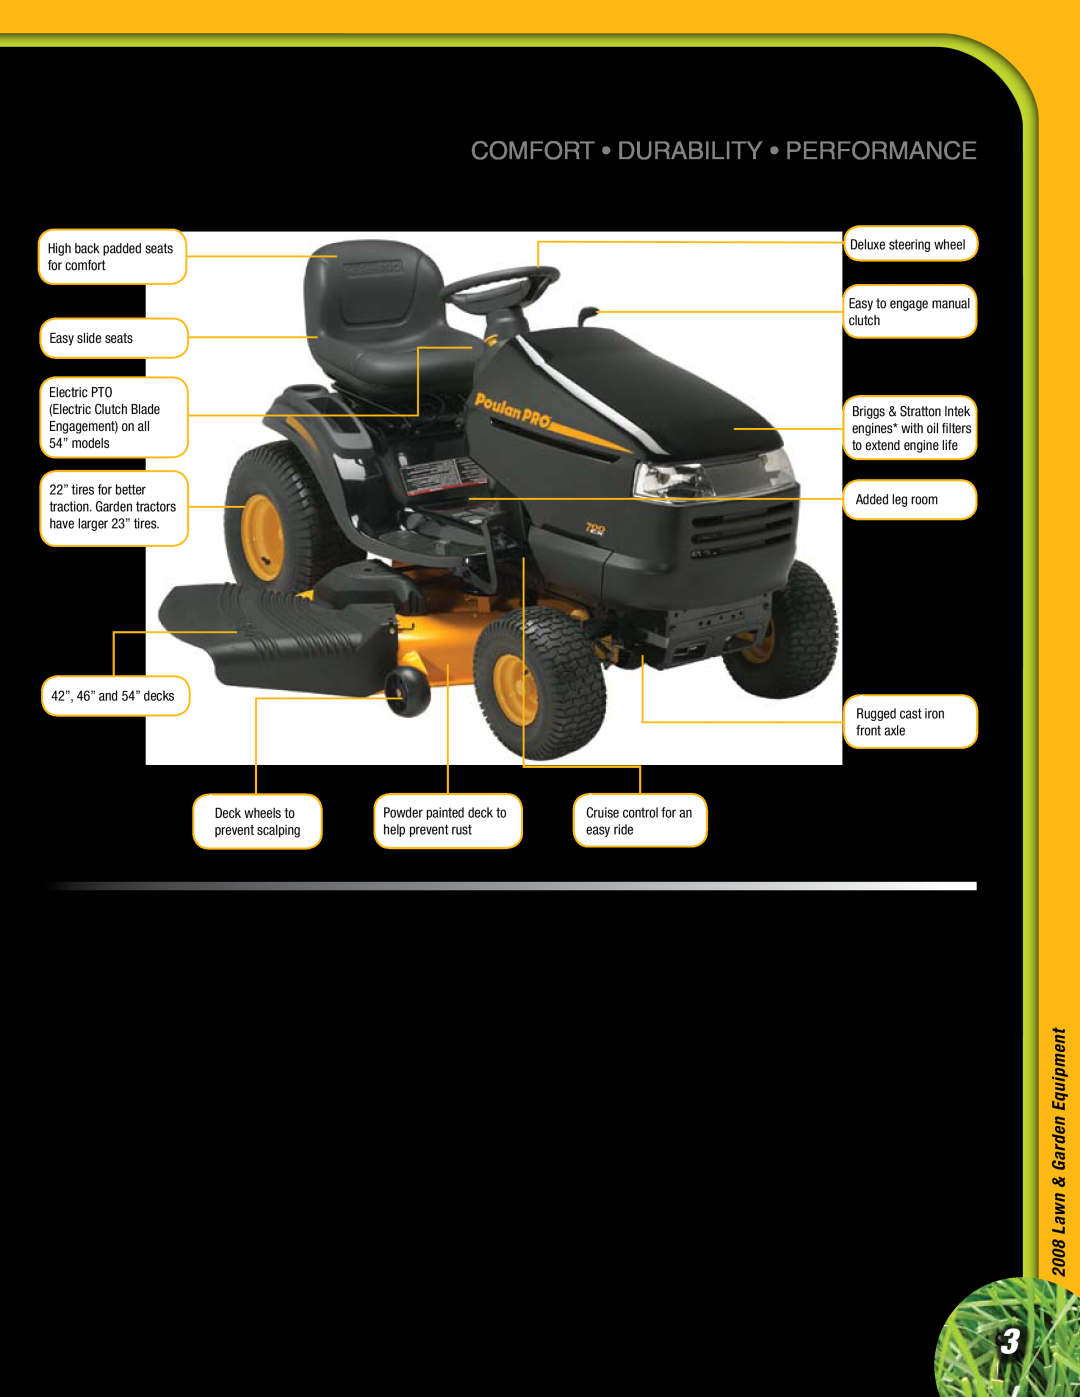 Poulan Lawn & Garden Tractor What does a Poulan Pro tractor offer?, Power and Features, Comfort Durability Performance 